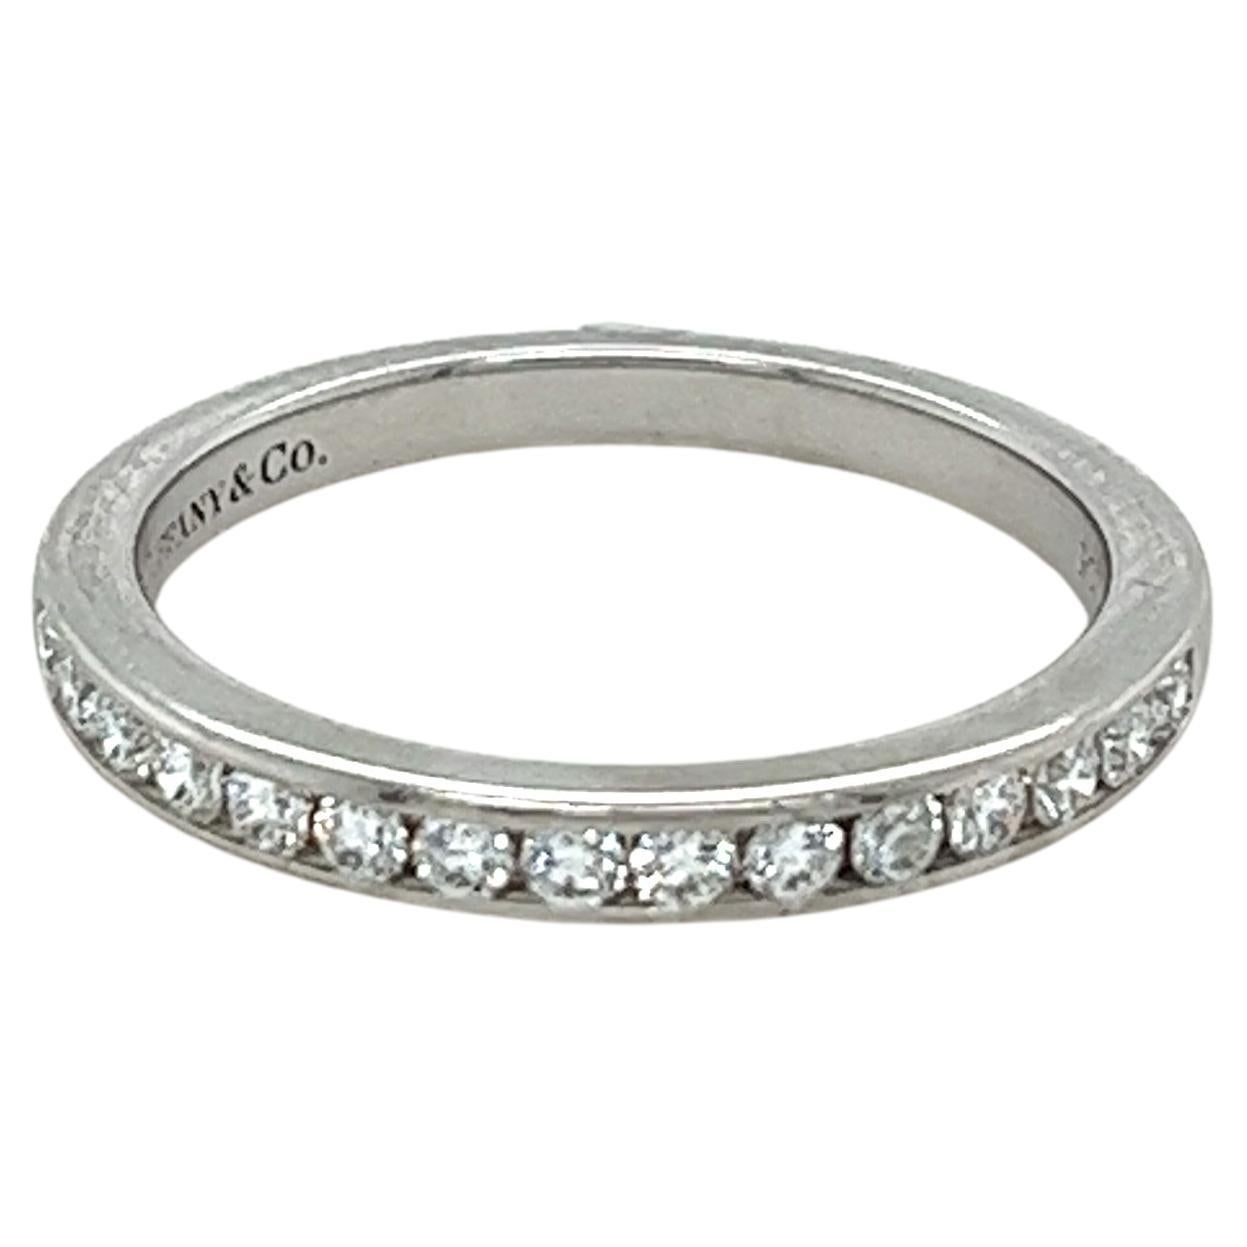 A Tiffany & Co Diamond Wedding Ring, with 15 round brilliant cut diamonds channel set in platinum on a 2.5mm band.

Diamonds 15 = 0.24ct (estimated)

Metal: Platinum PT950
Carat: 0.24ct
Colour: F
Clarity: VS
Cut: Round Brilliant
Weight: 3.77